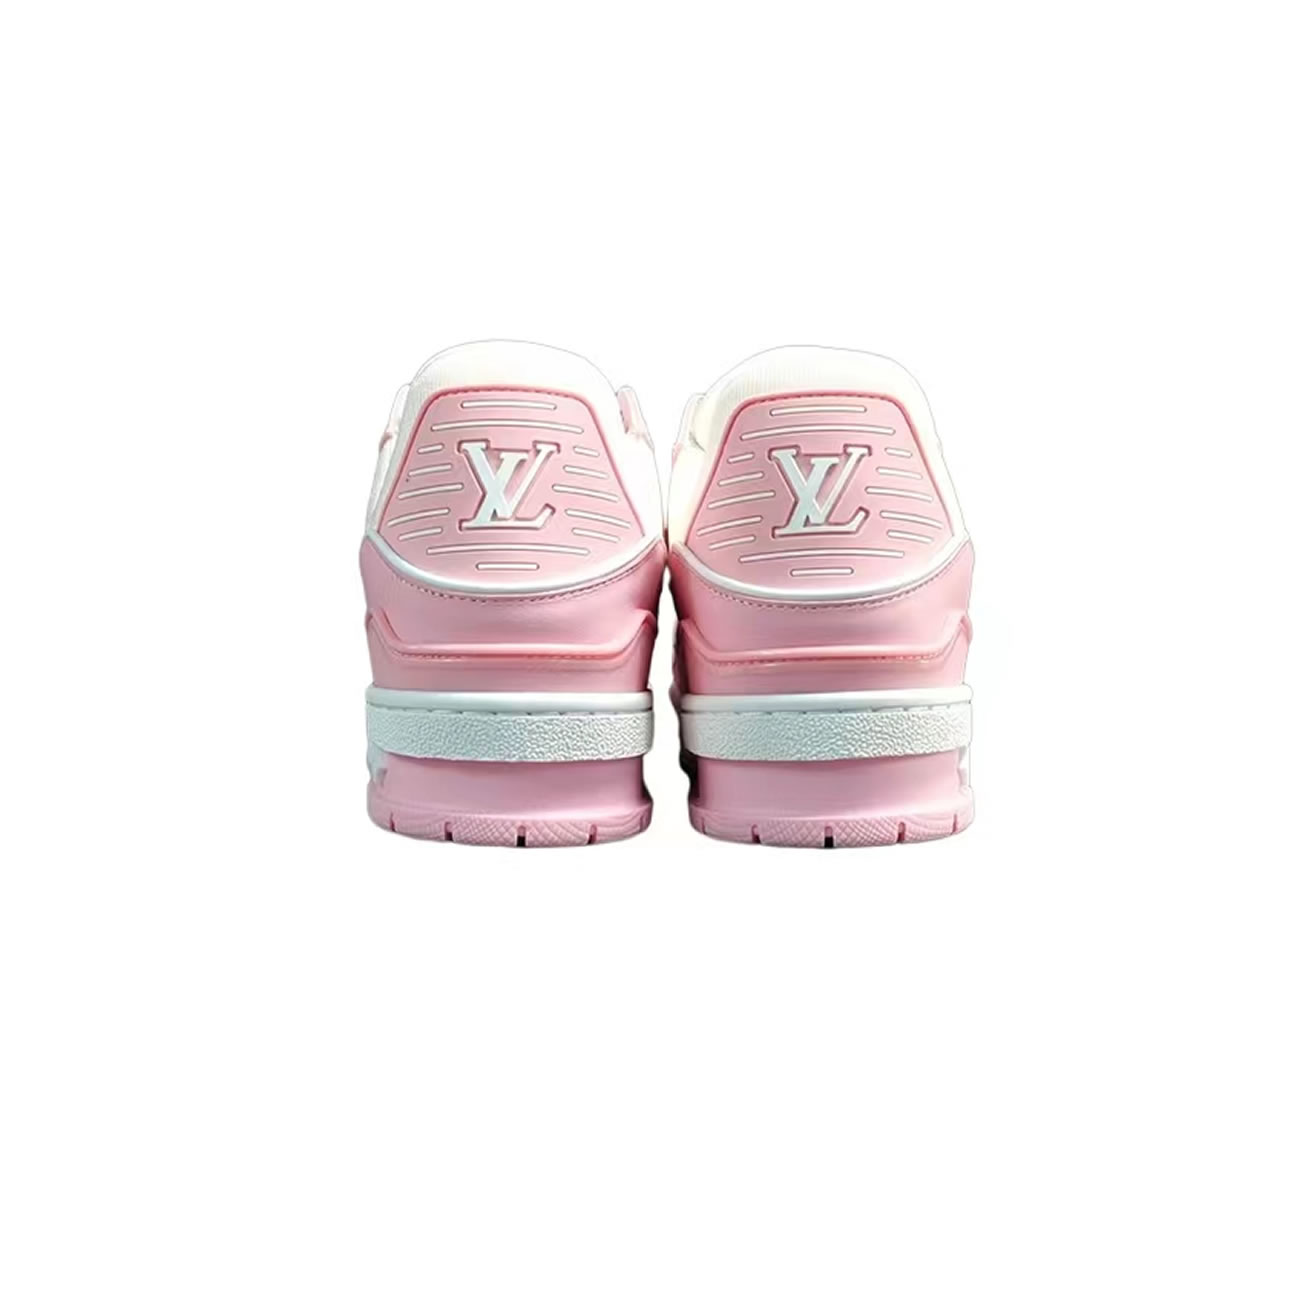 LV TRAINER Vuitton SNEAKER PINK 1AA6W3